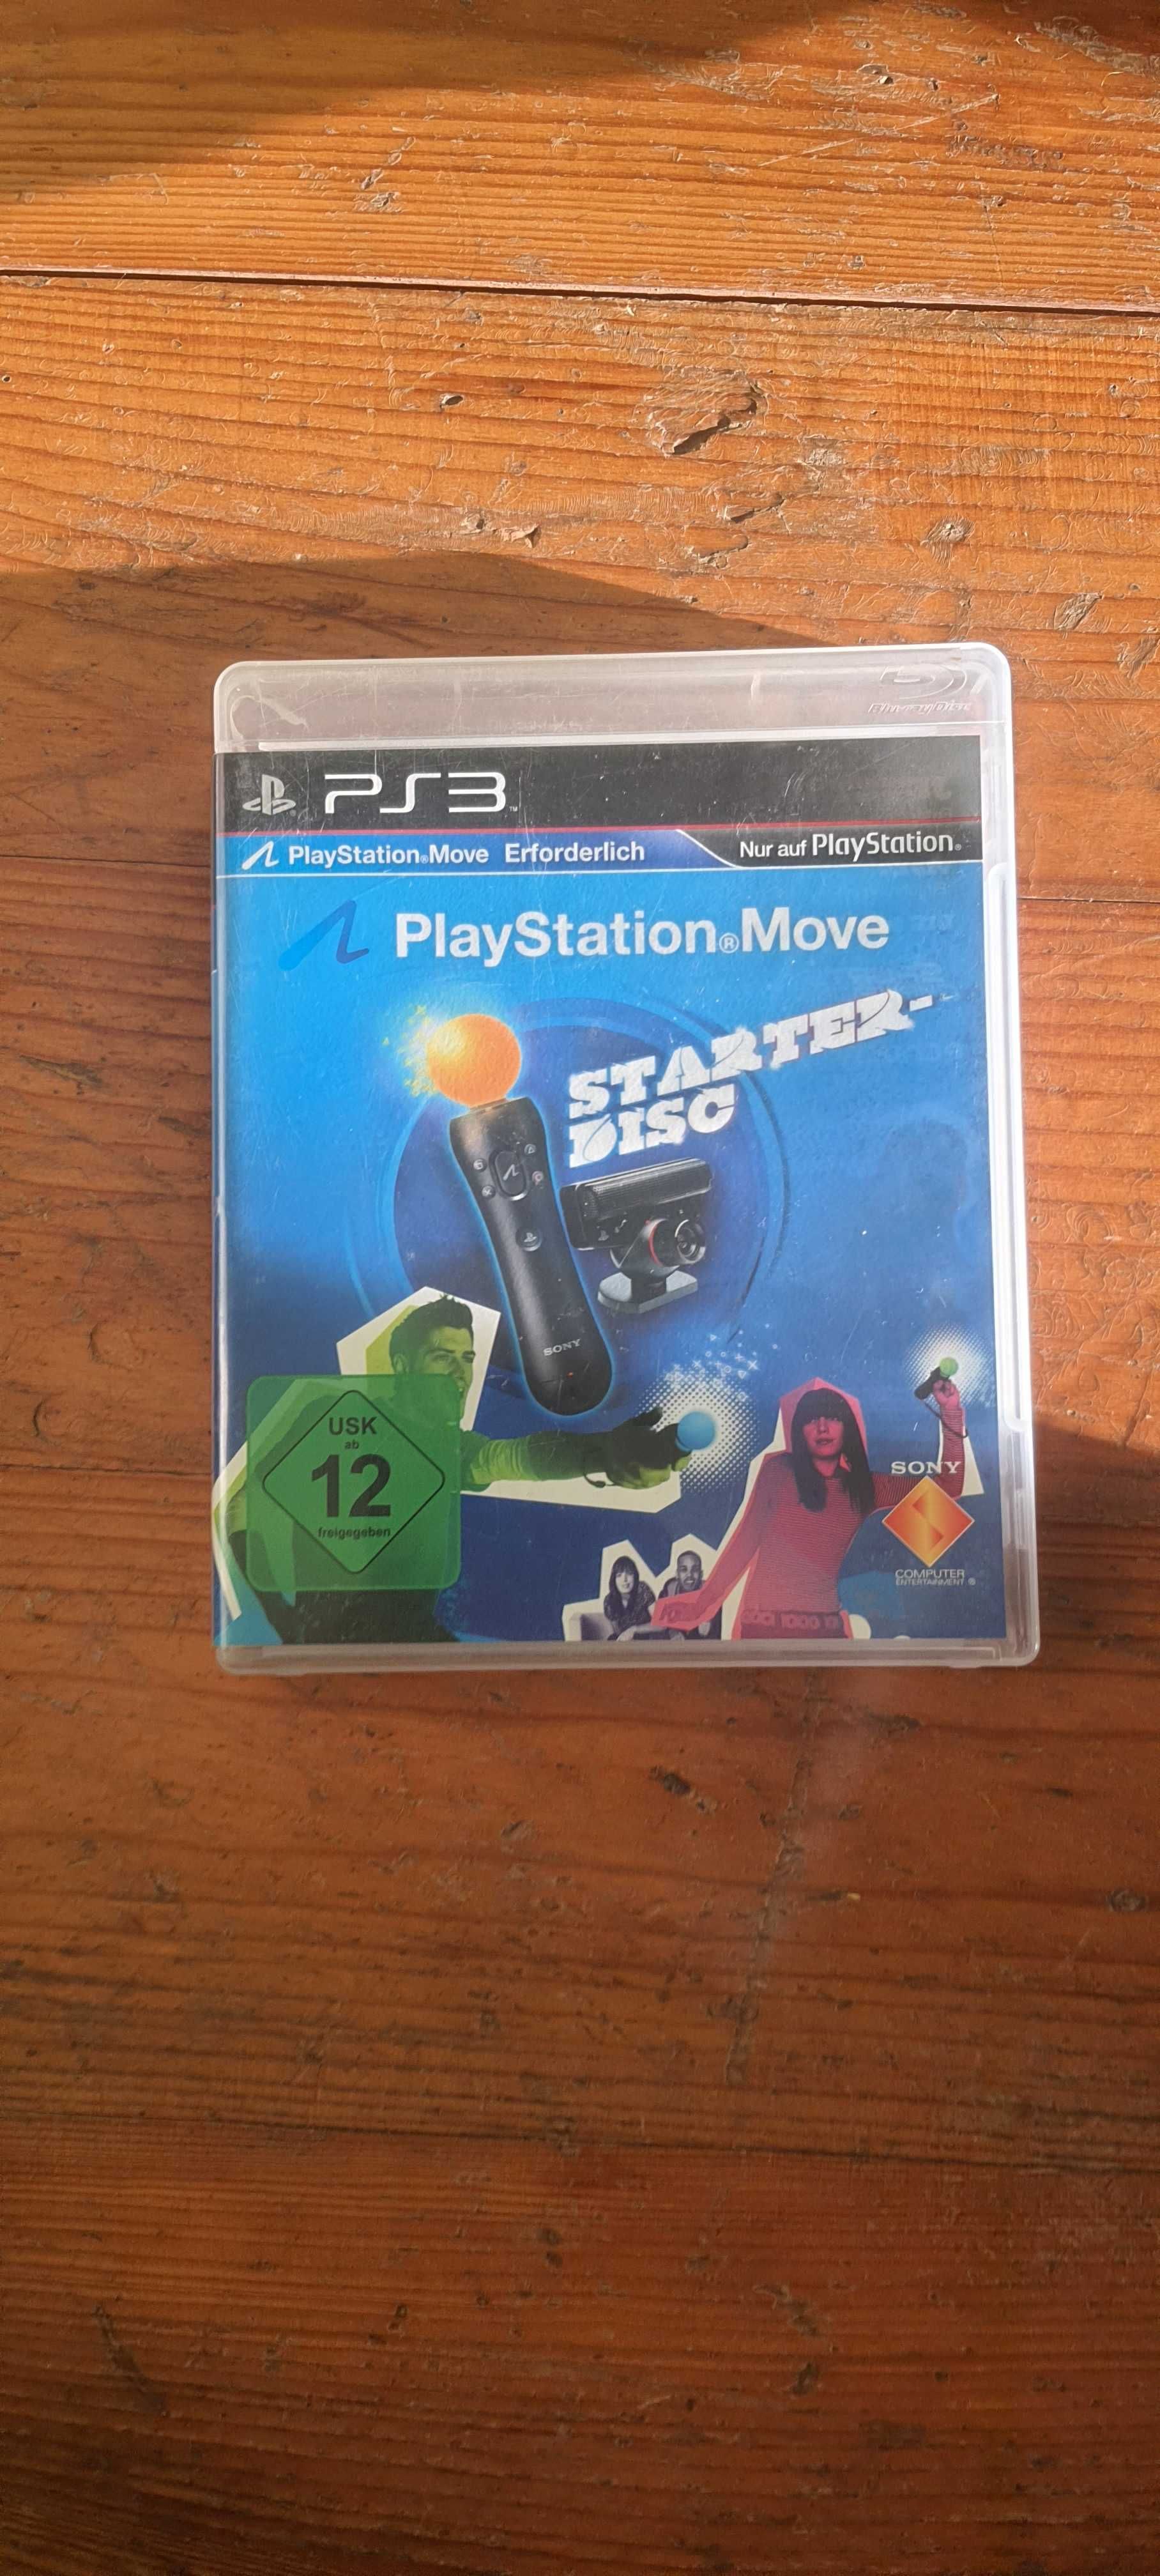 Play station move